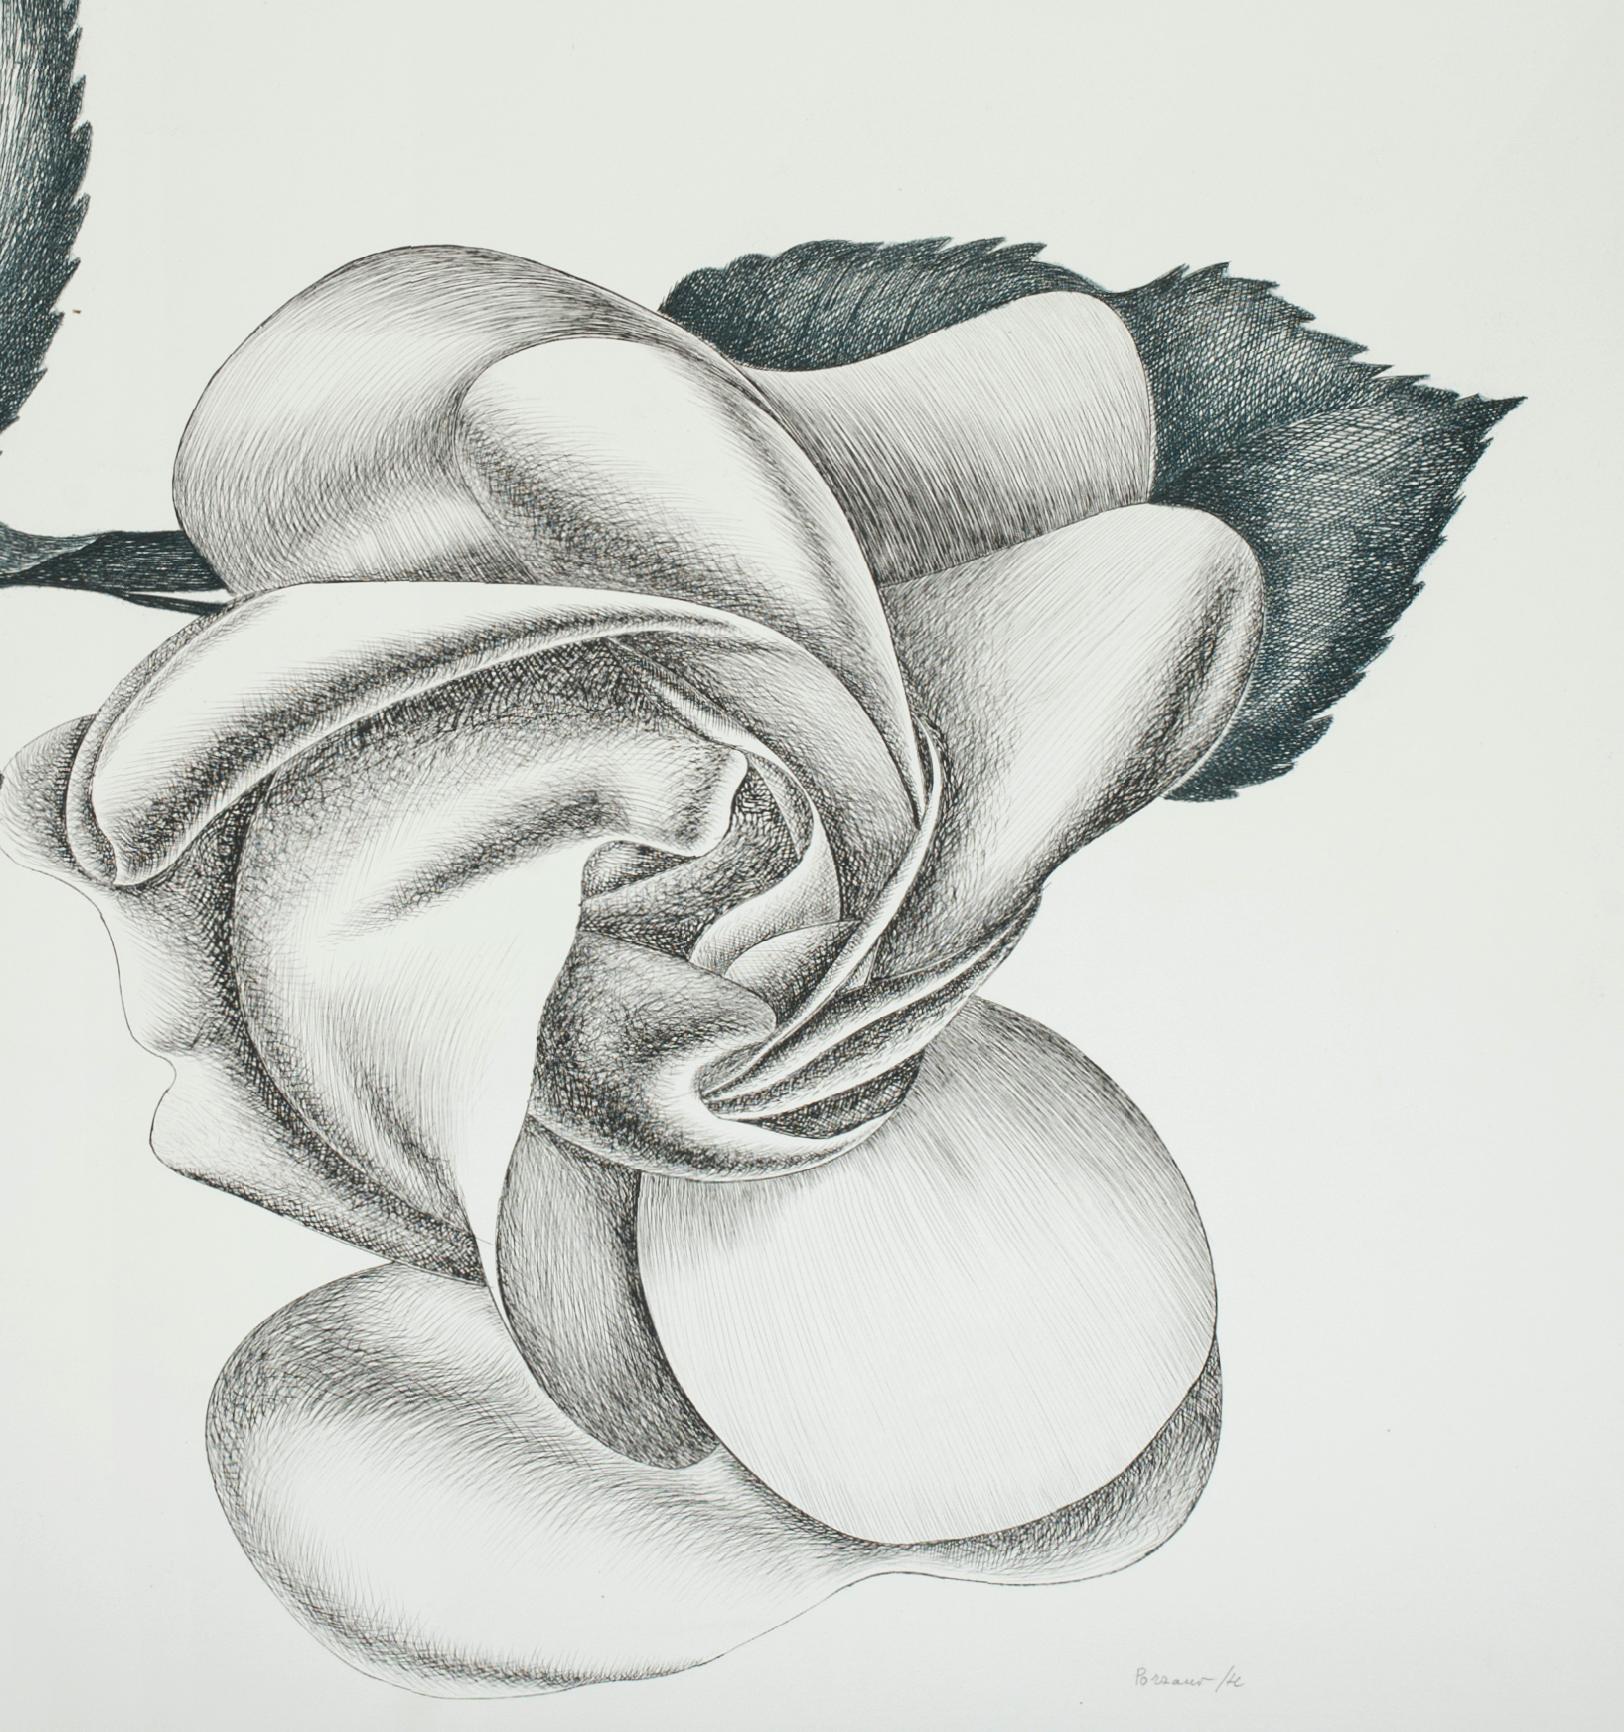 Black Rose is a beautiful original black and white etching on paper, realized by the Italian artist Giacomo Porzano (1925-2006).

Hand-signed, dated and numbered in Roman numerals by the artist in pencil on lower margin.

Edition of 50 prints